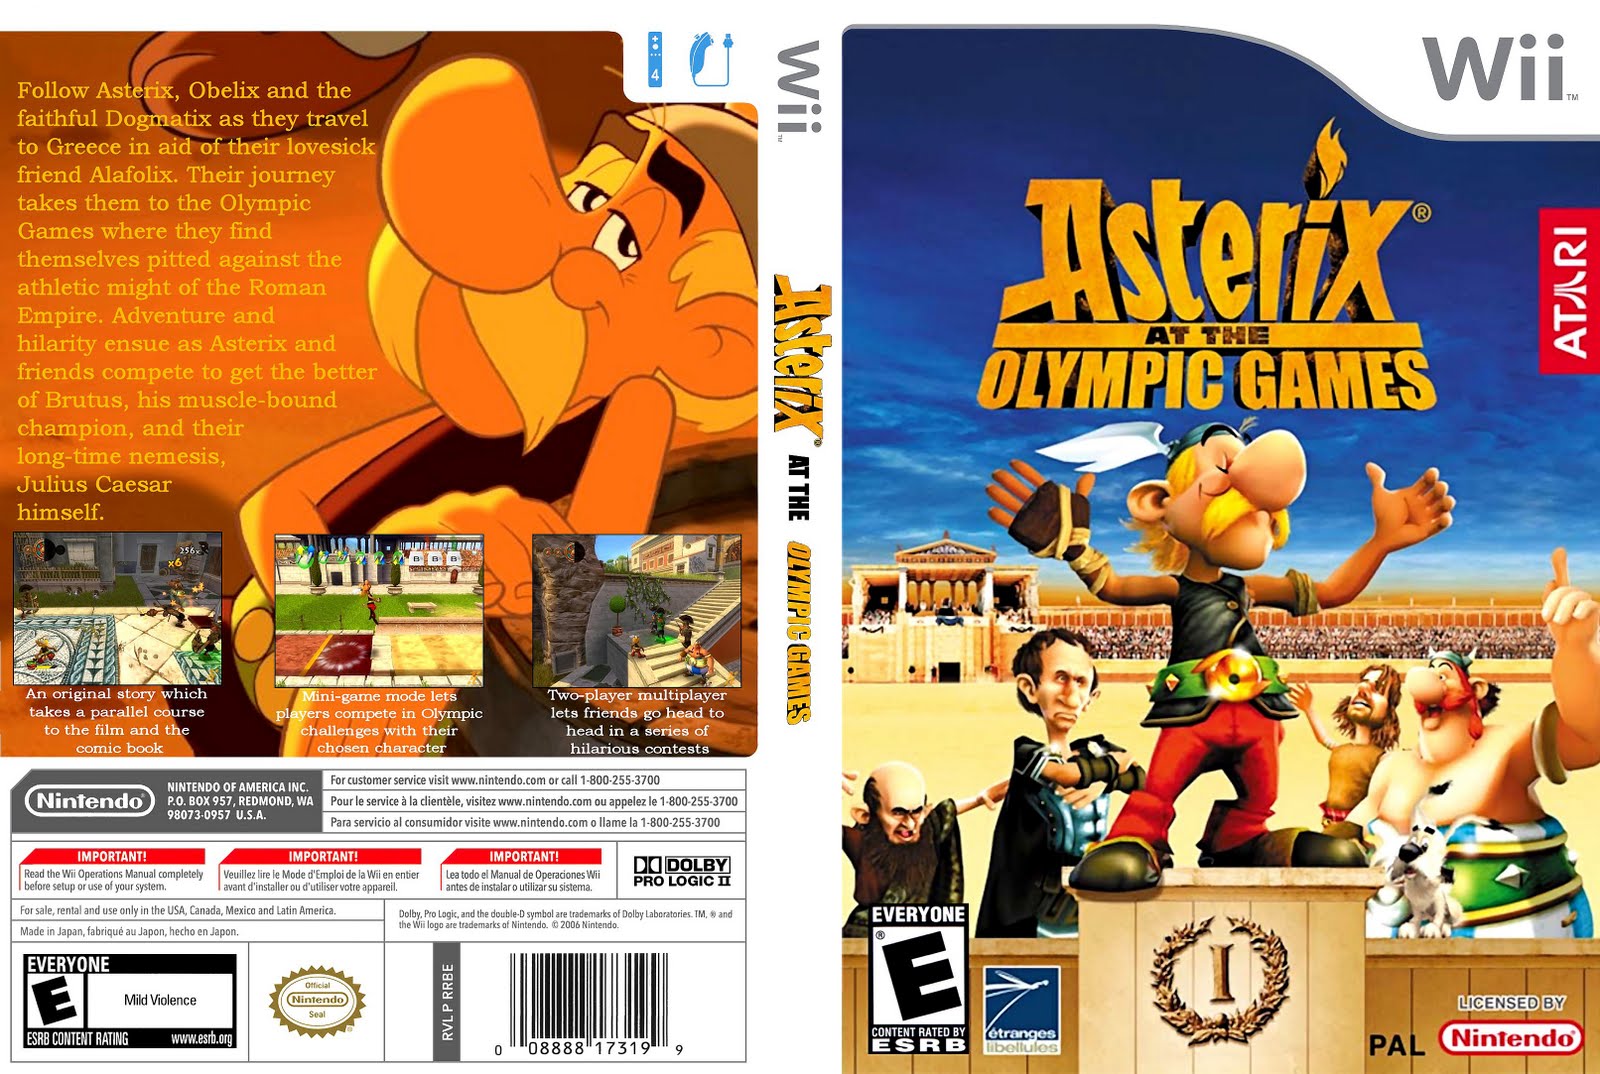 Download wii games. Asterix at the Olympic games Xbox 360. Asterix (Rus) Nintendo обложка. Wii games. Игра на диске 5 в 1 Астерикс.